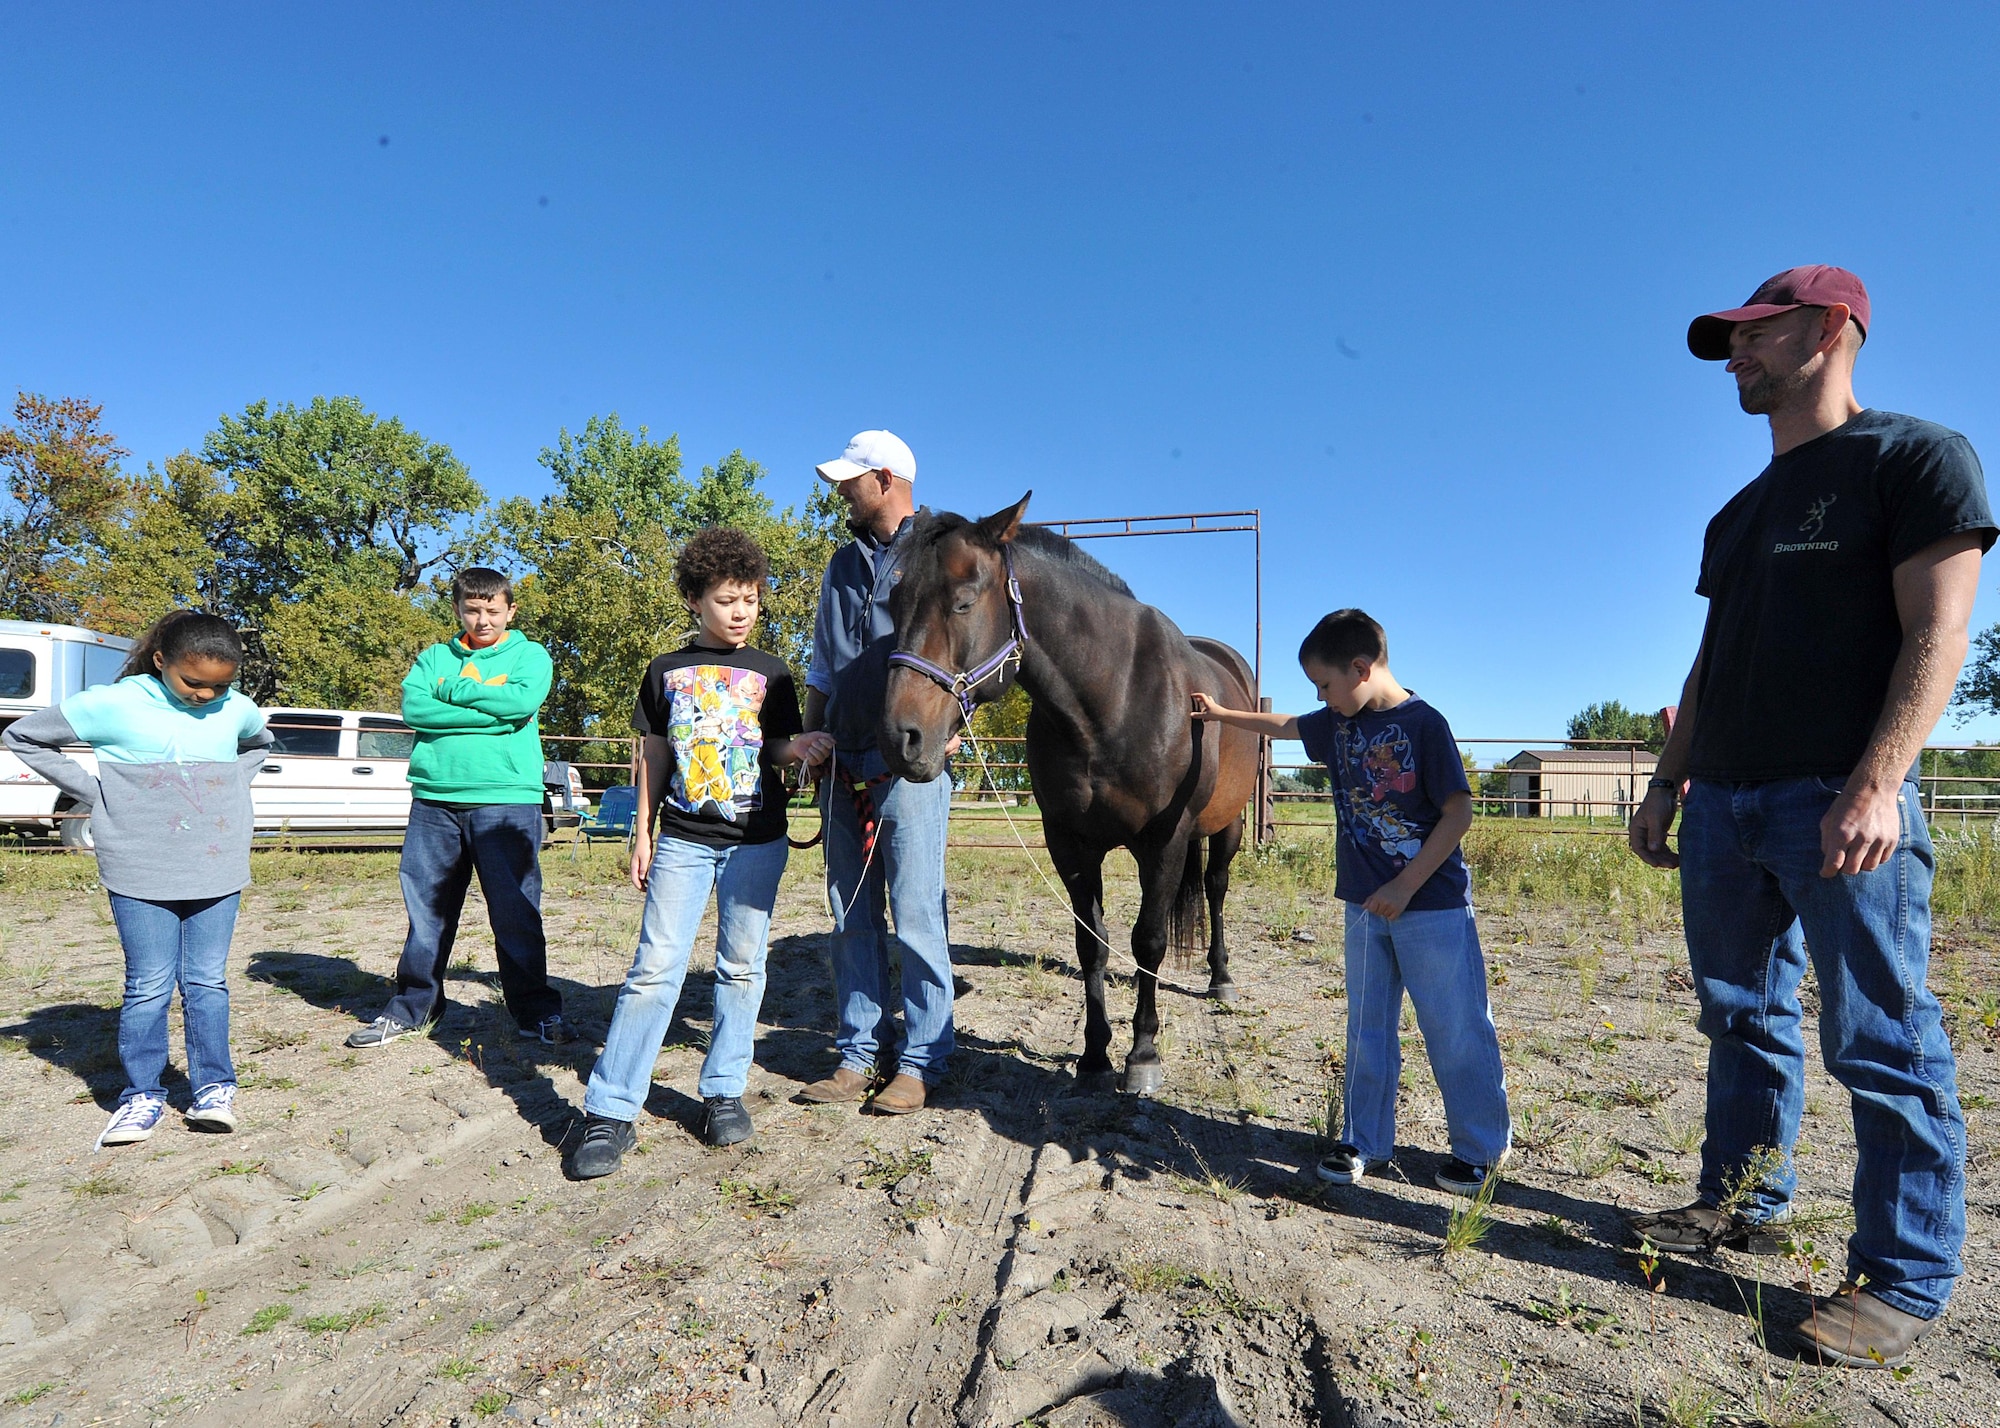 Children begin Equine Camp activities by walking horses on Grand Forks Air Force Base, N.D. Sept. 17, 2016. The Grand Forks AFB Exceptional Family Member Program sponsored the camp which supported development in self-esteem, self-confidence and team building by encouraging children to interact with horses through different activities. (U.S. Air Force photo by Airman 1st Class Elijaih Tiggs)